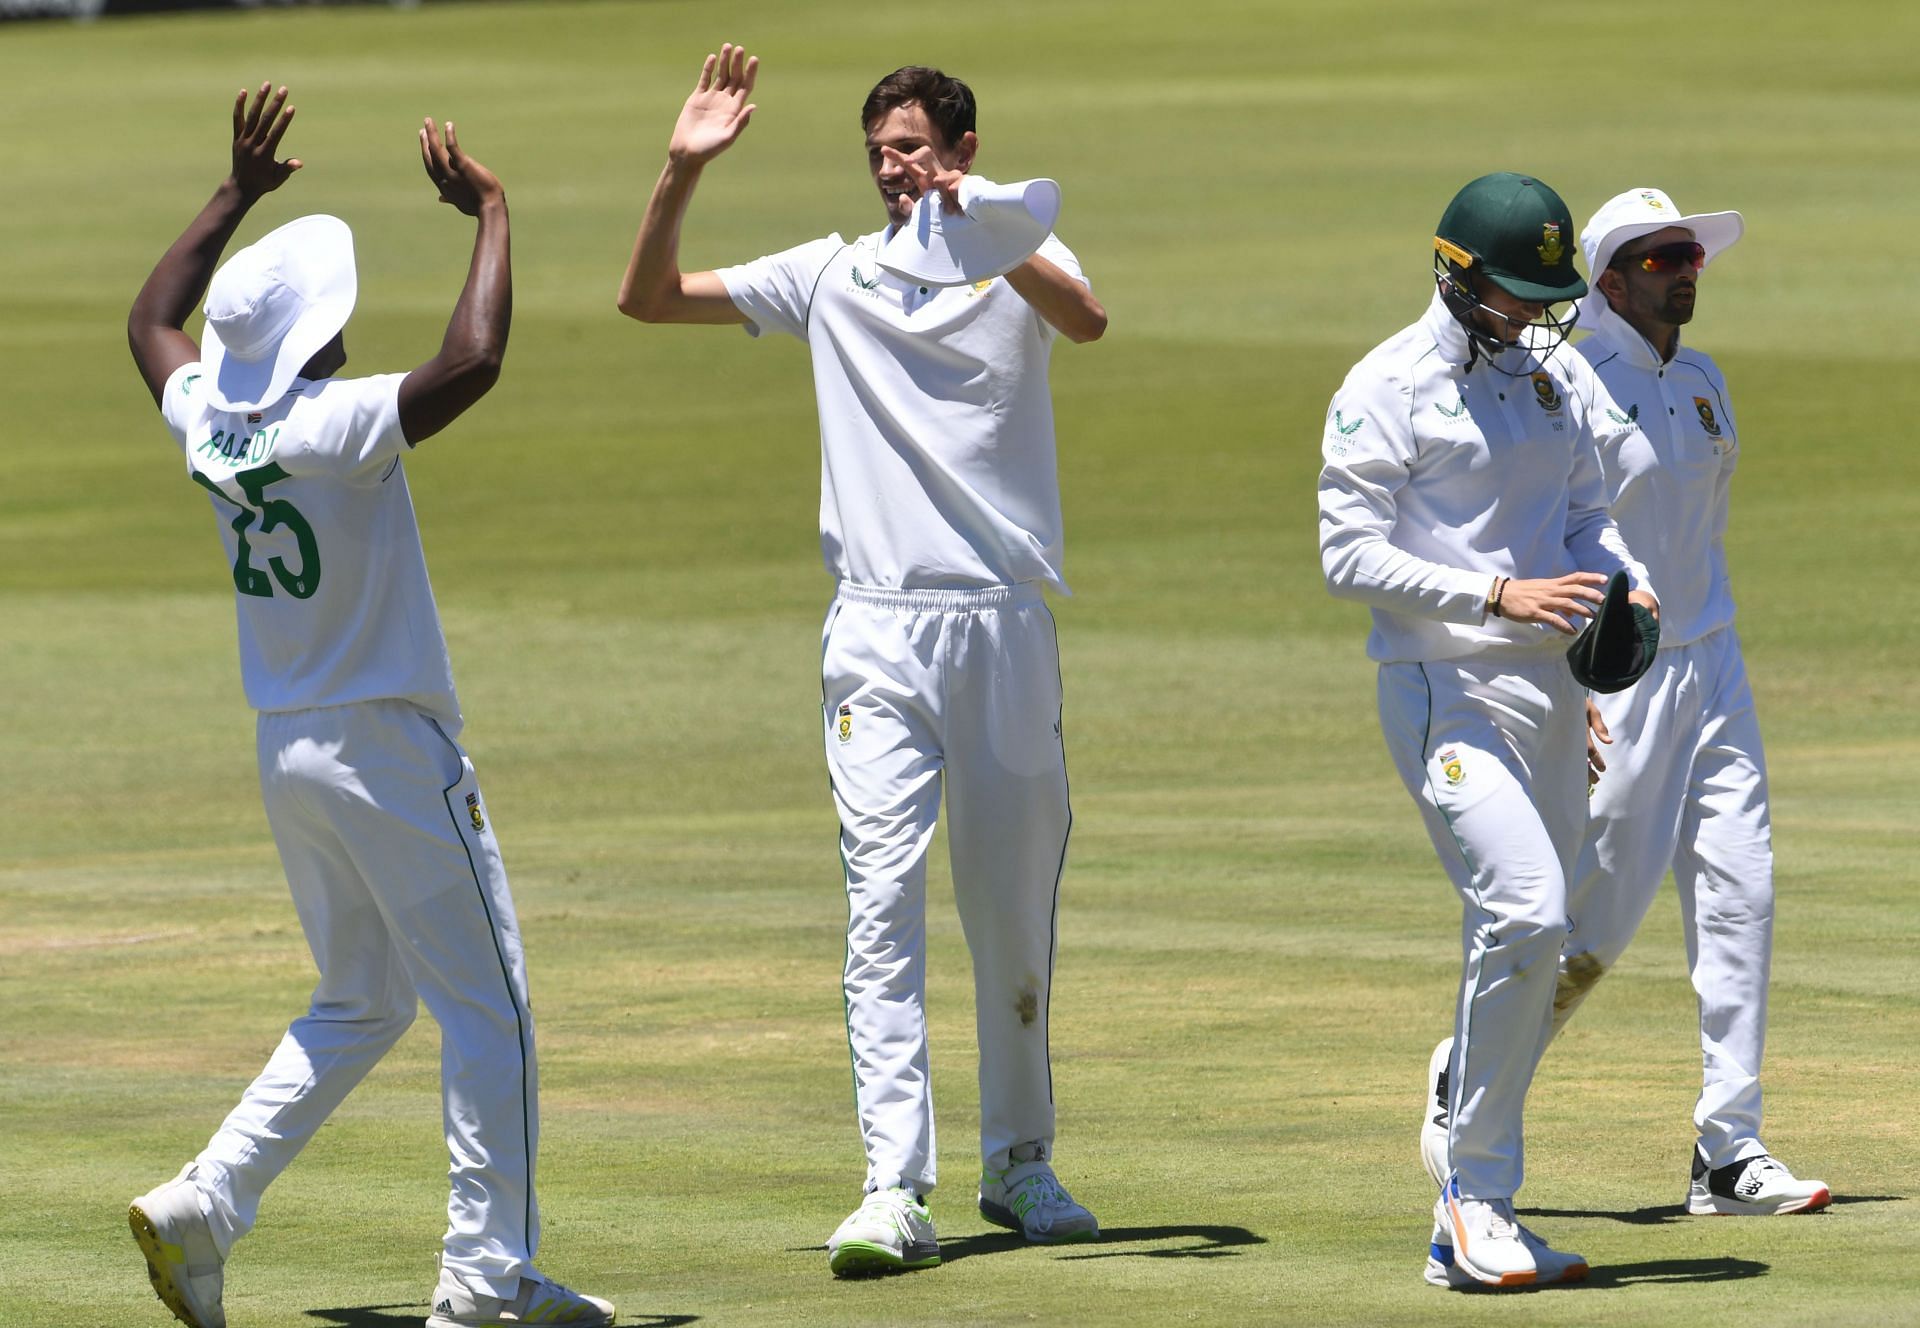 South Africa found their rhythm on Day 3 to bowl out India for 327